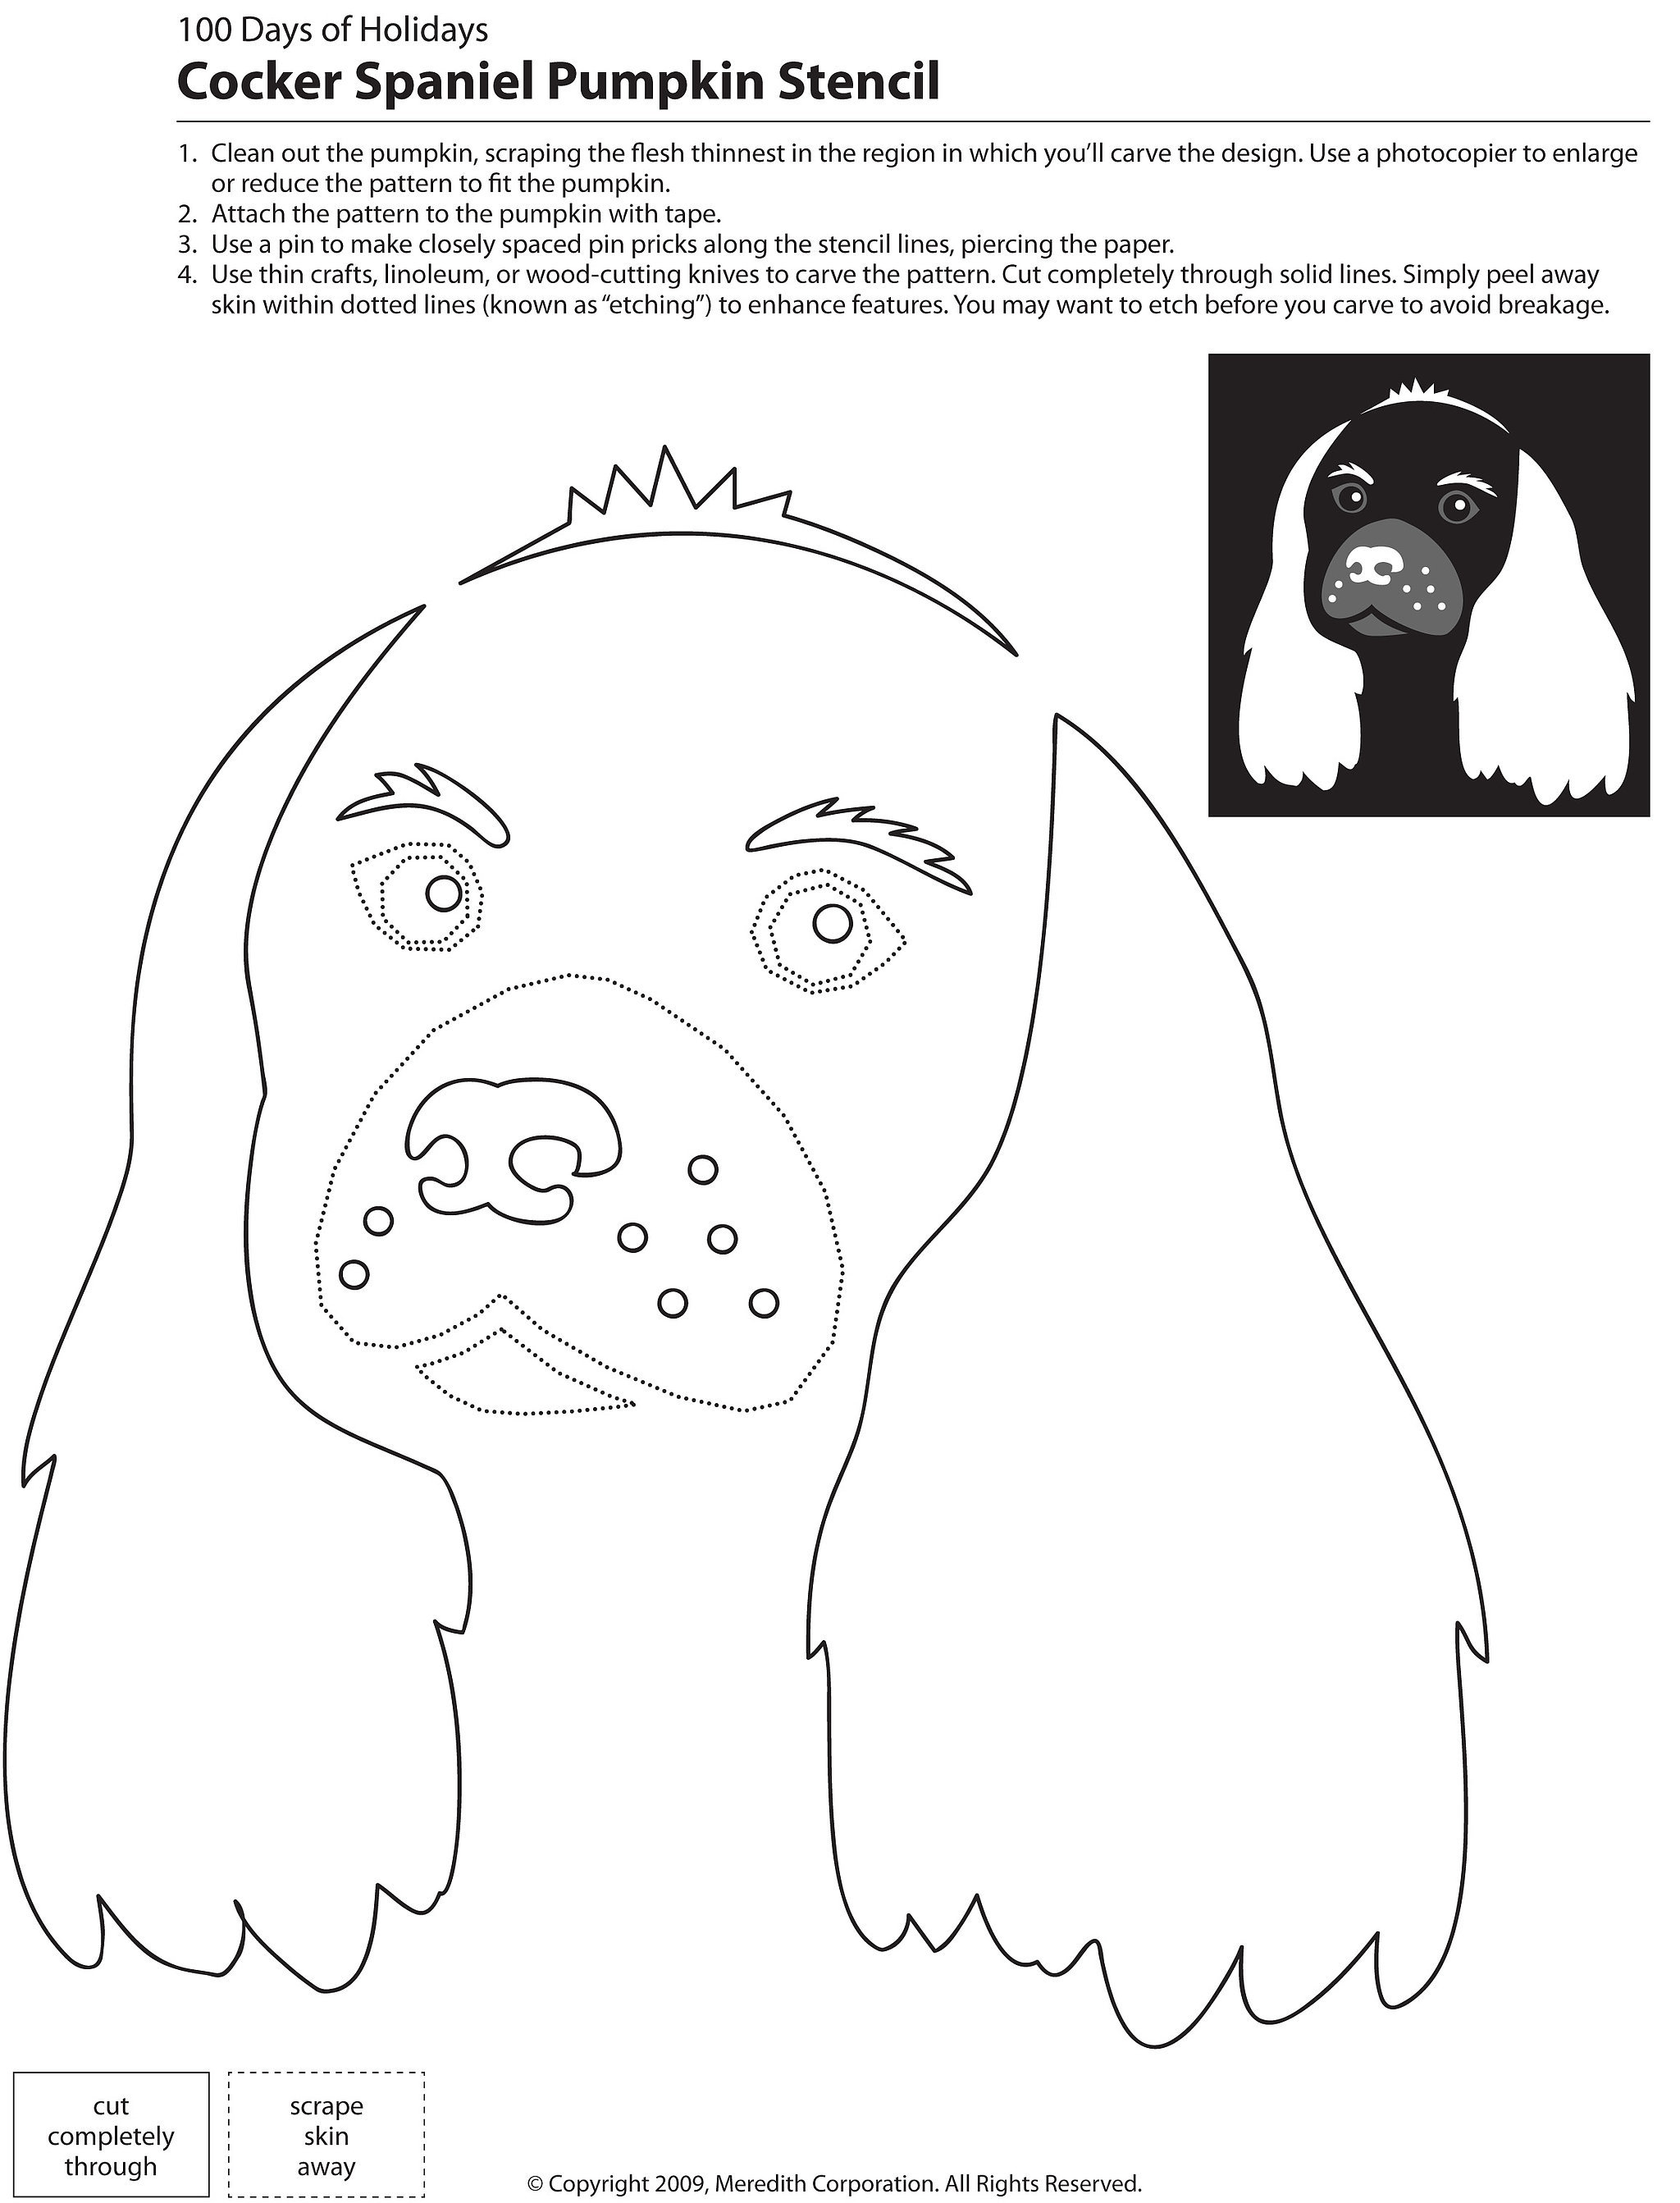 Dogs, Cats, and Other Pets 22 Downloadable Dog Breed Pumpkin Stencils